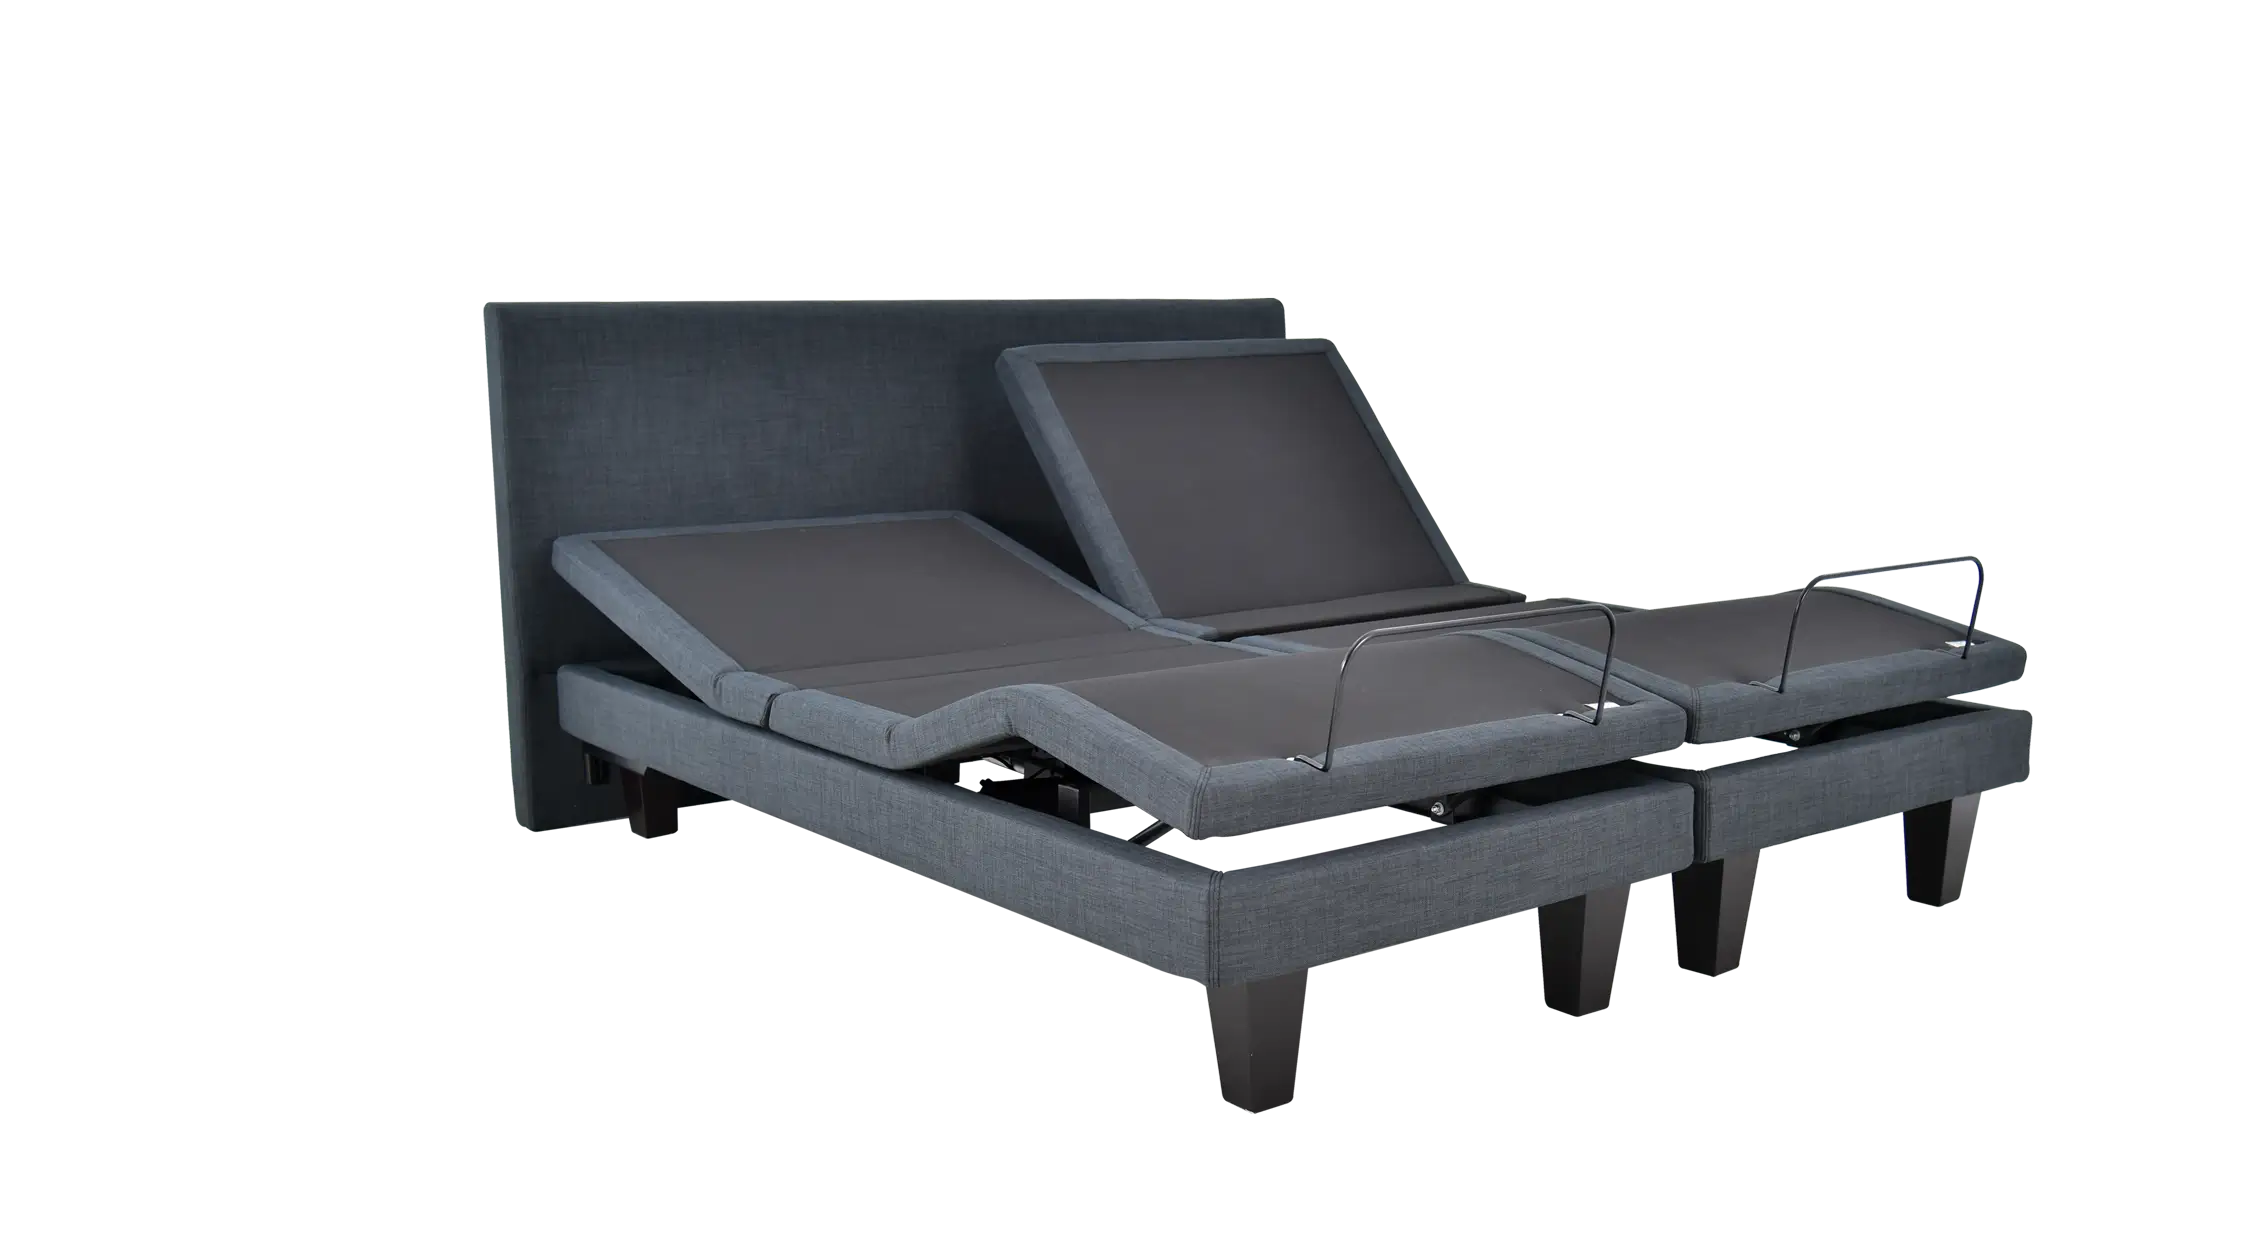 An ErgoExpanding adjustable bed with extended lumbar support and an extension deck, designed for enhanced comfort and support. The sleek modern design integrates advanced features including massage functionality, while the extended lumbar support and extension deck offer additional support and customization options for optimal relaxation and spinal alignment.